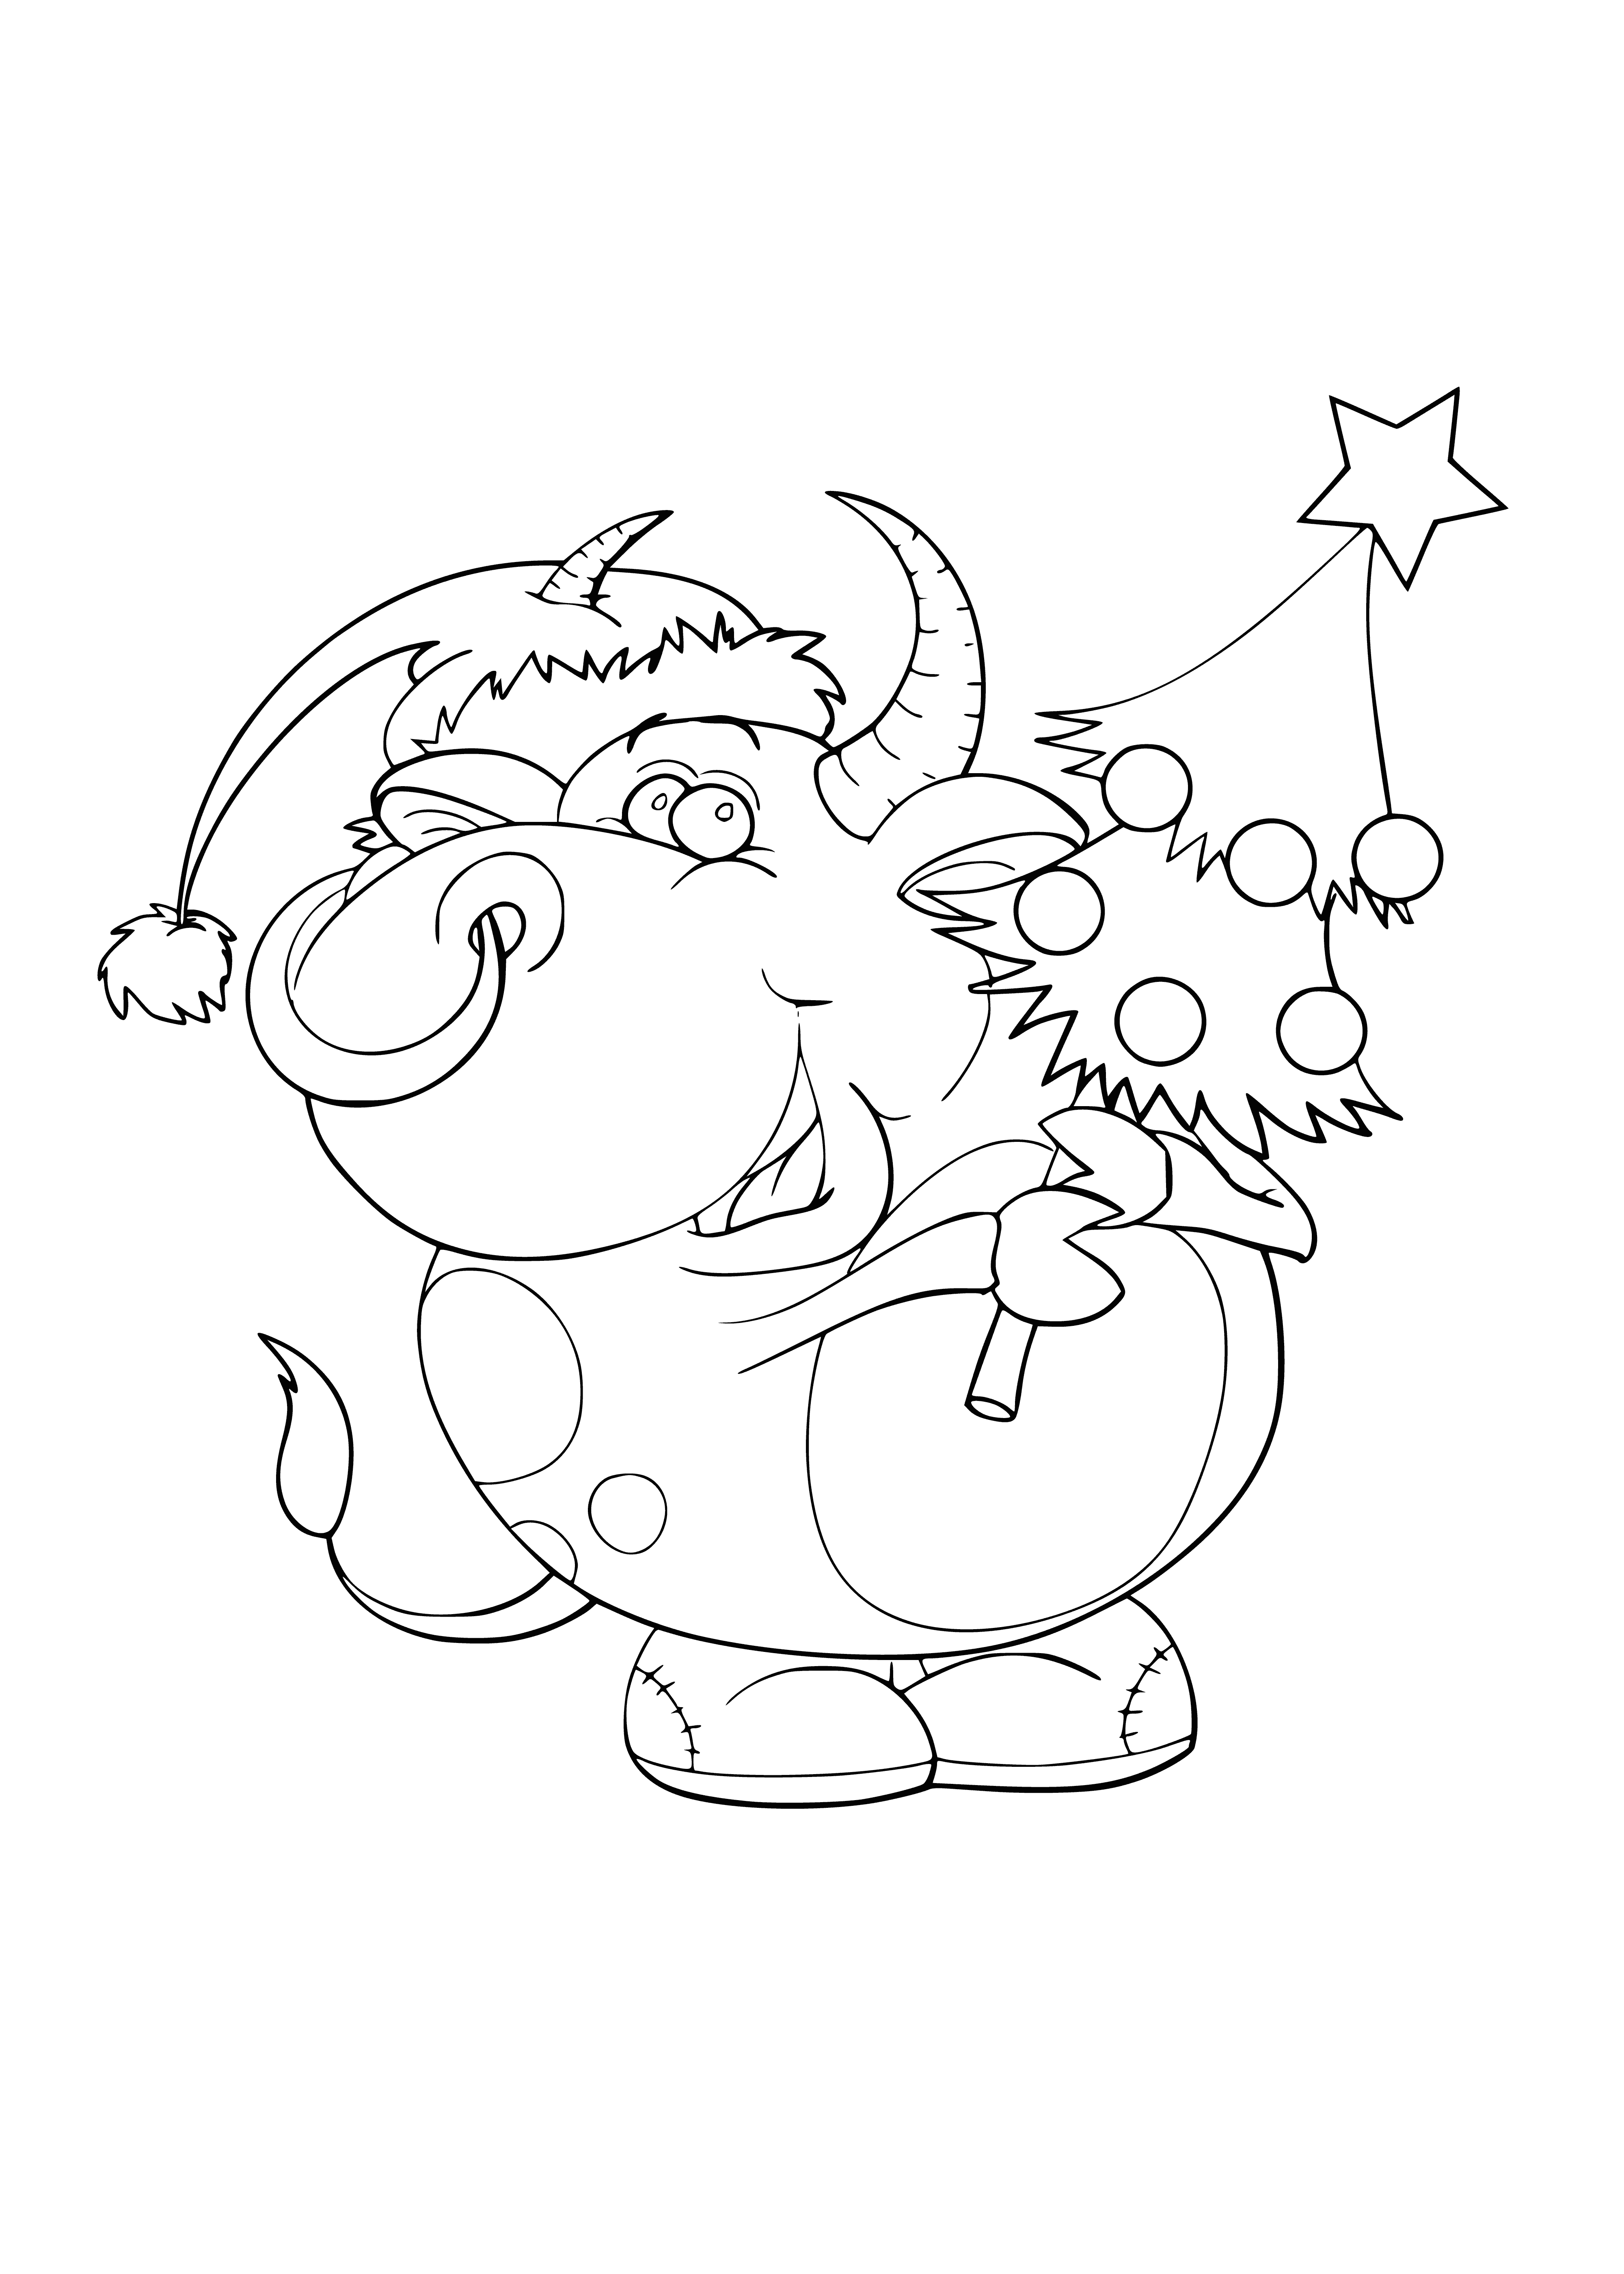 coloring page: Bulls are symbols of power, strength and abundance; a muscular body, curved horns and white mark representing abundance & fertile land. #YearSymbol